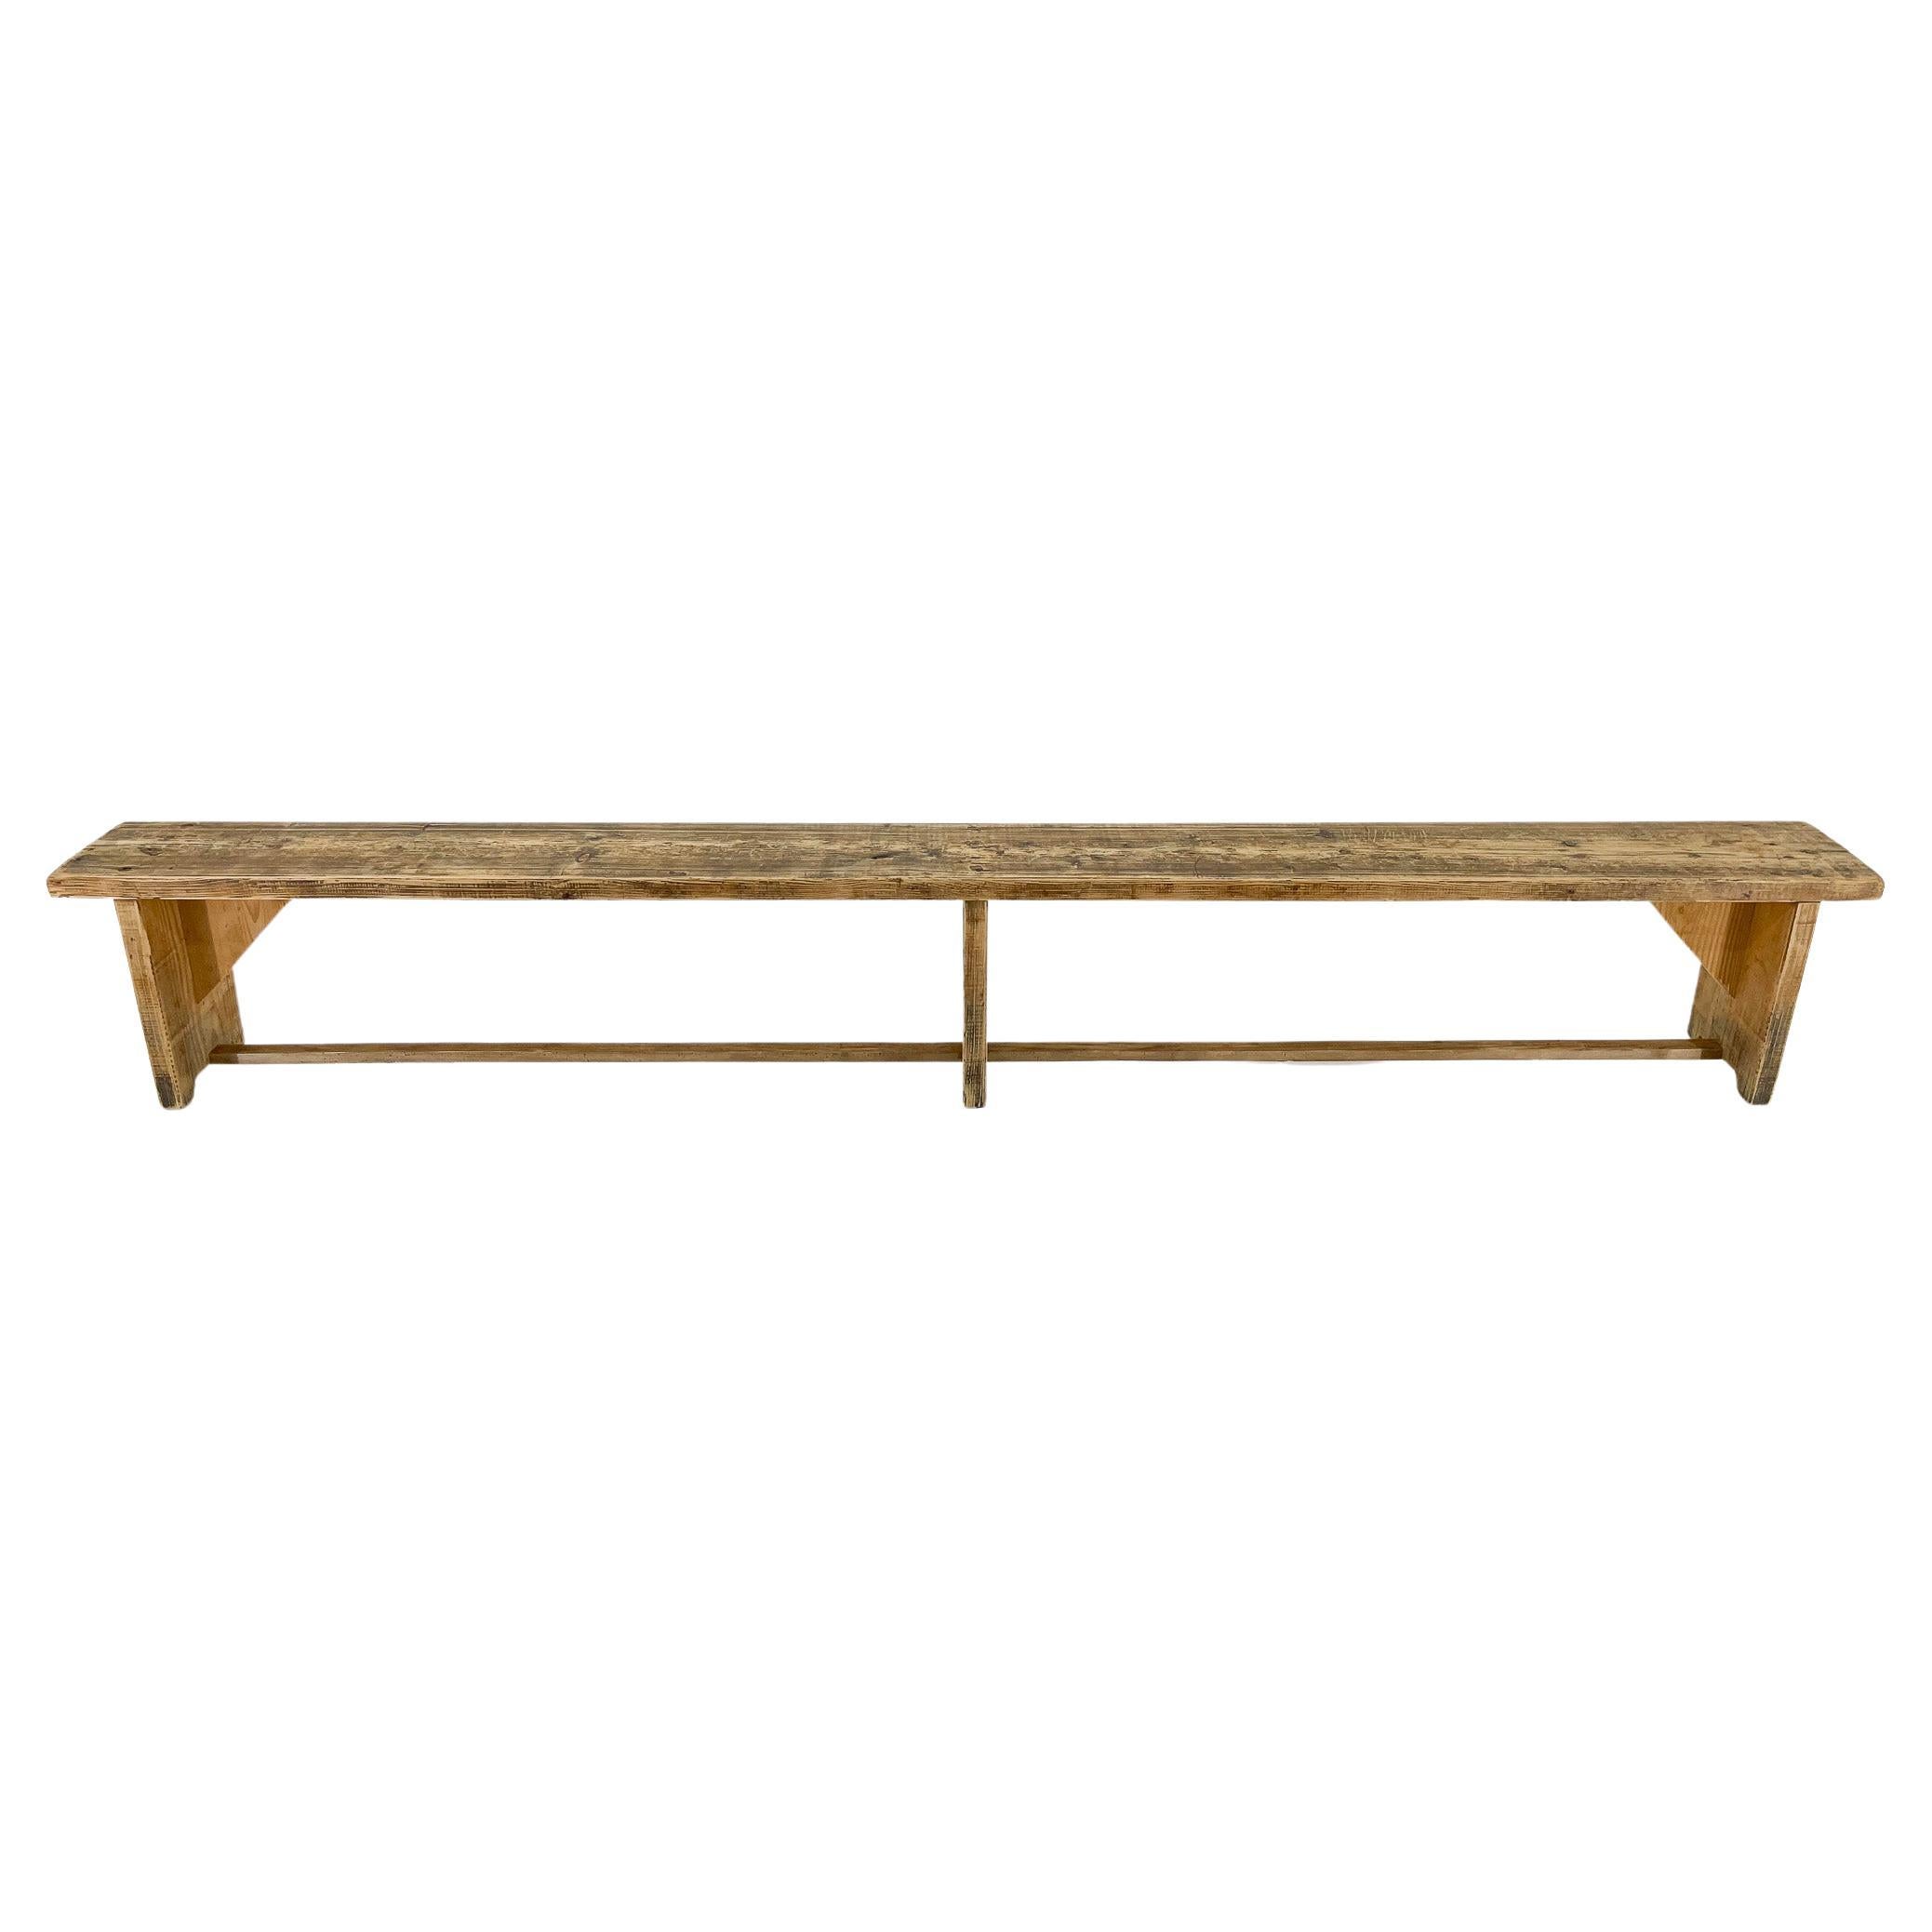 Vintage Long Wooden Bench, 1950s